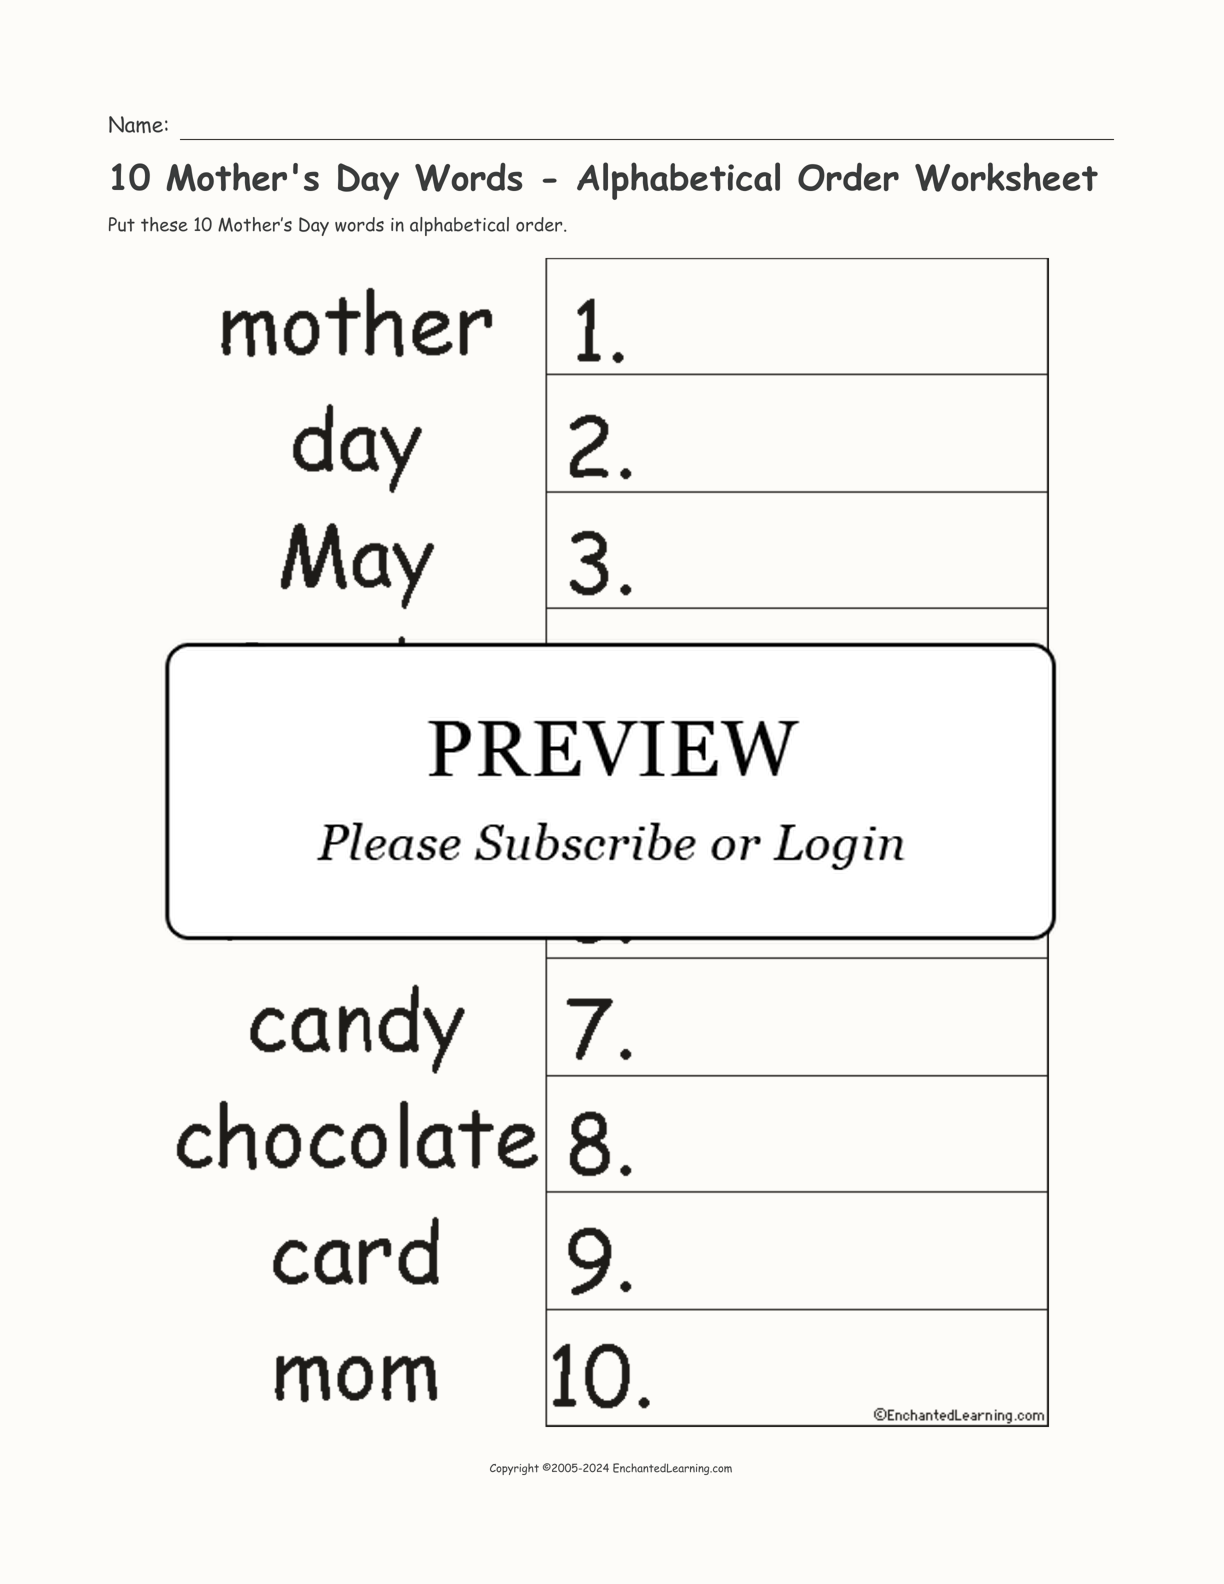 10 Mother's Day Words - Alphabetical Order Worksheet interactive worksheet page 1